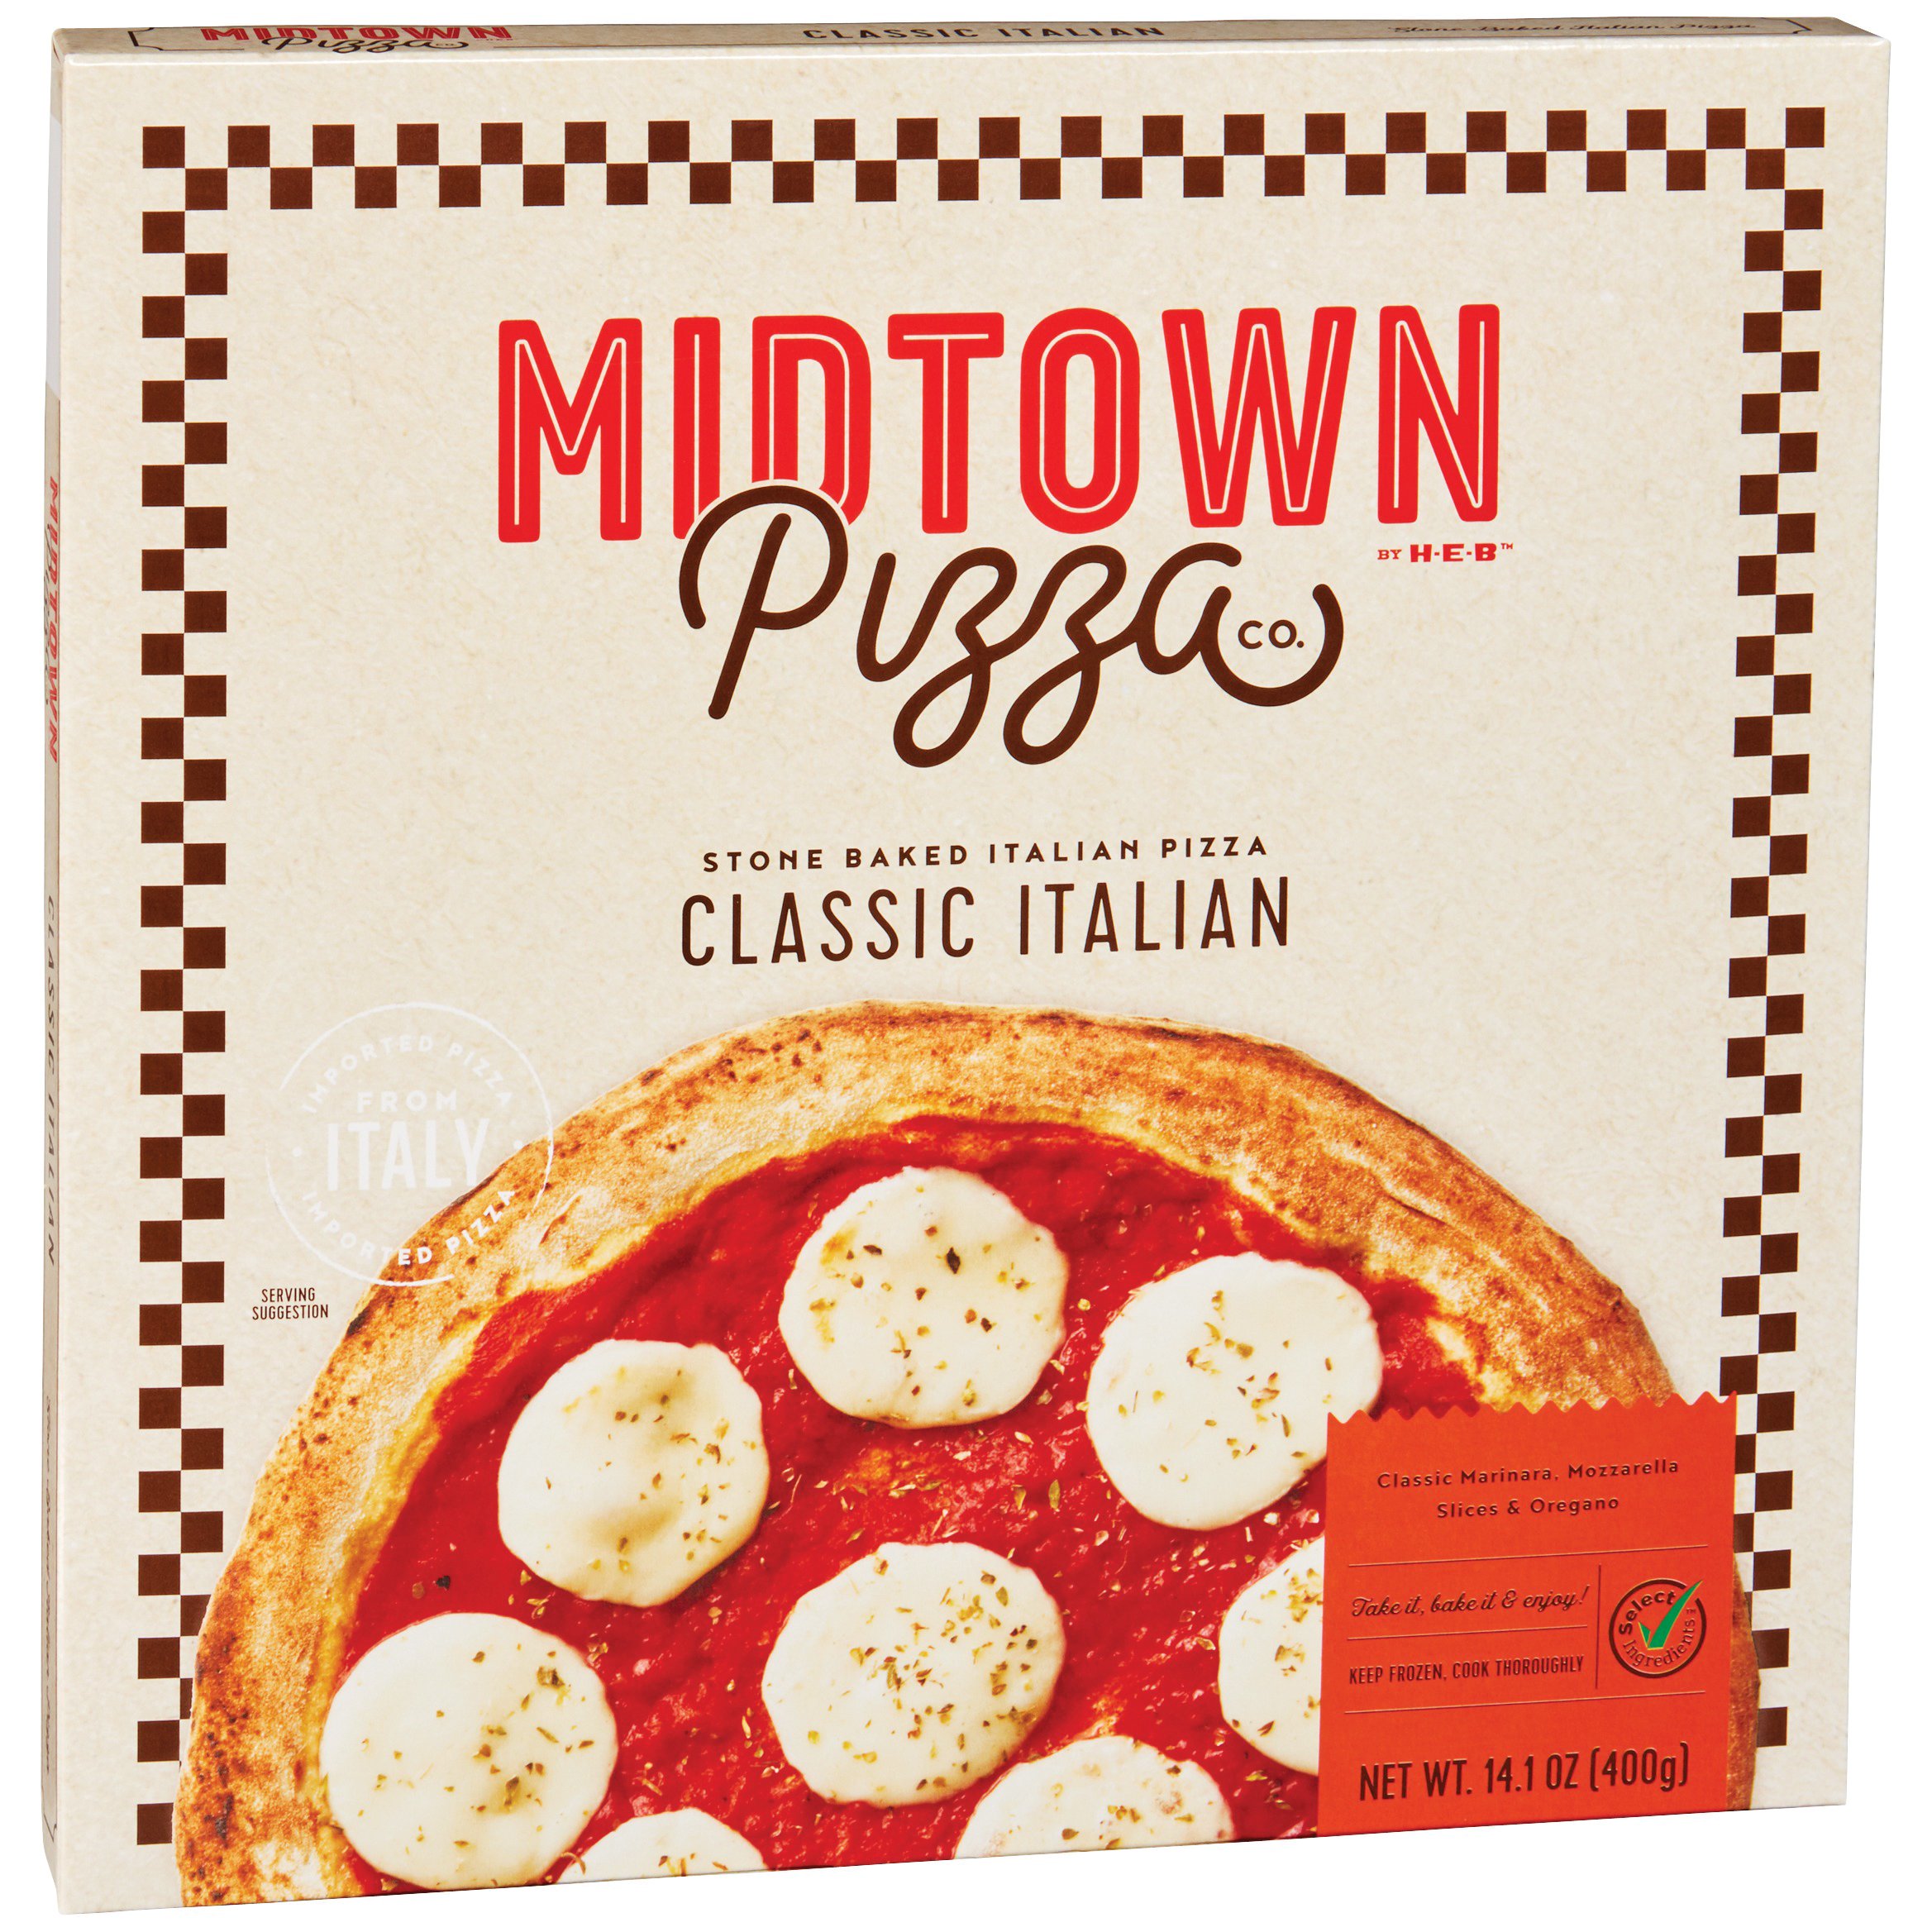 Midtown Pizza Co By Heb Select Ingredients Classic Italian Pizza Shop Pizza At Heb